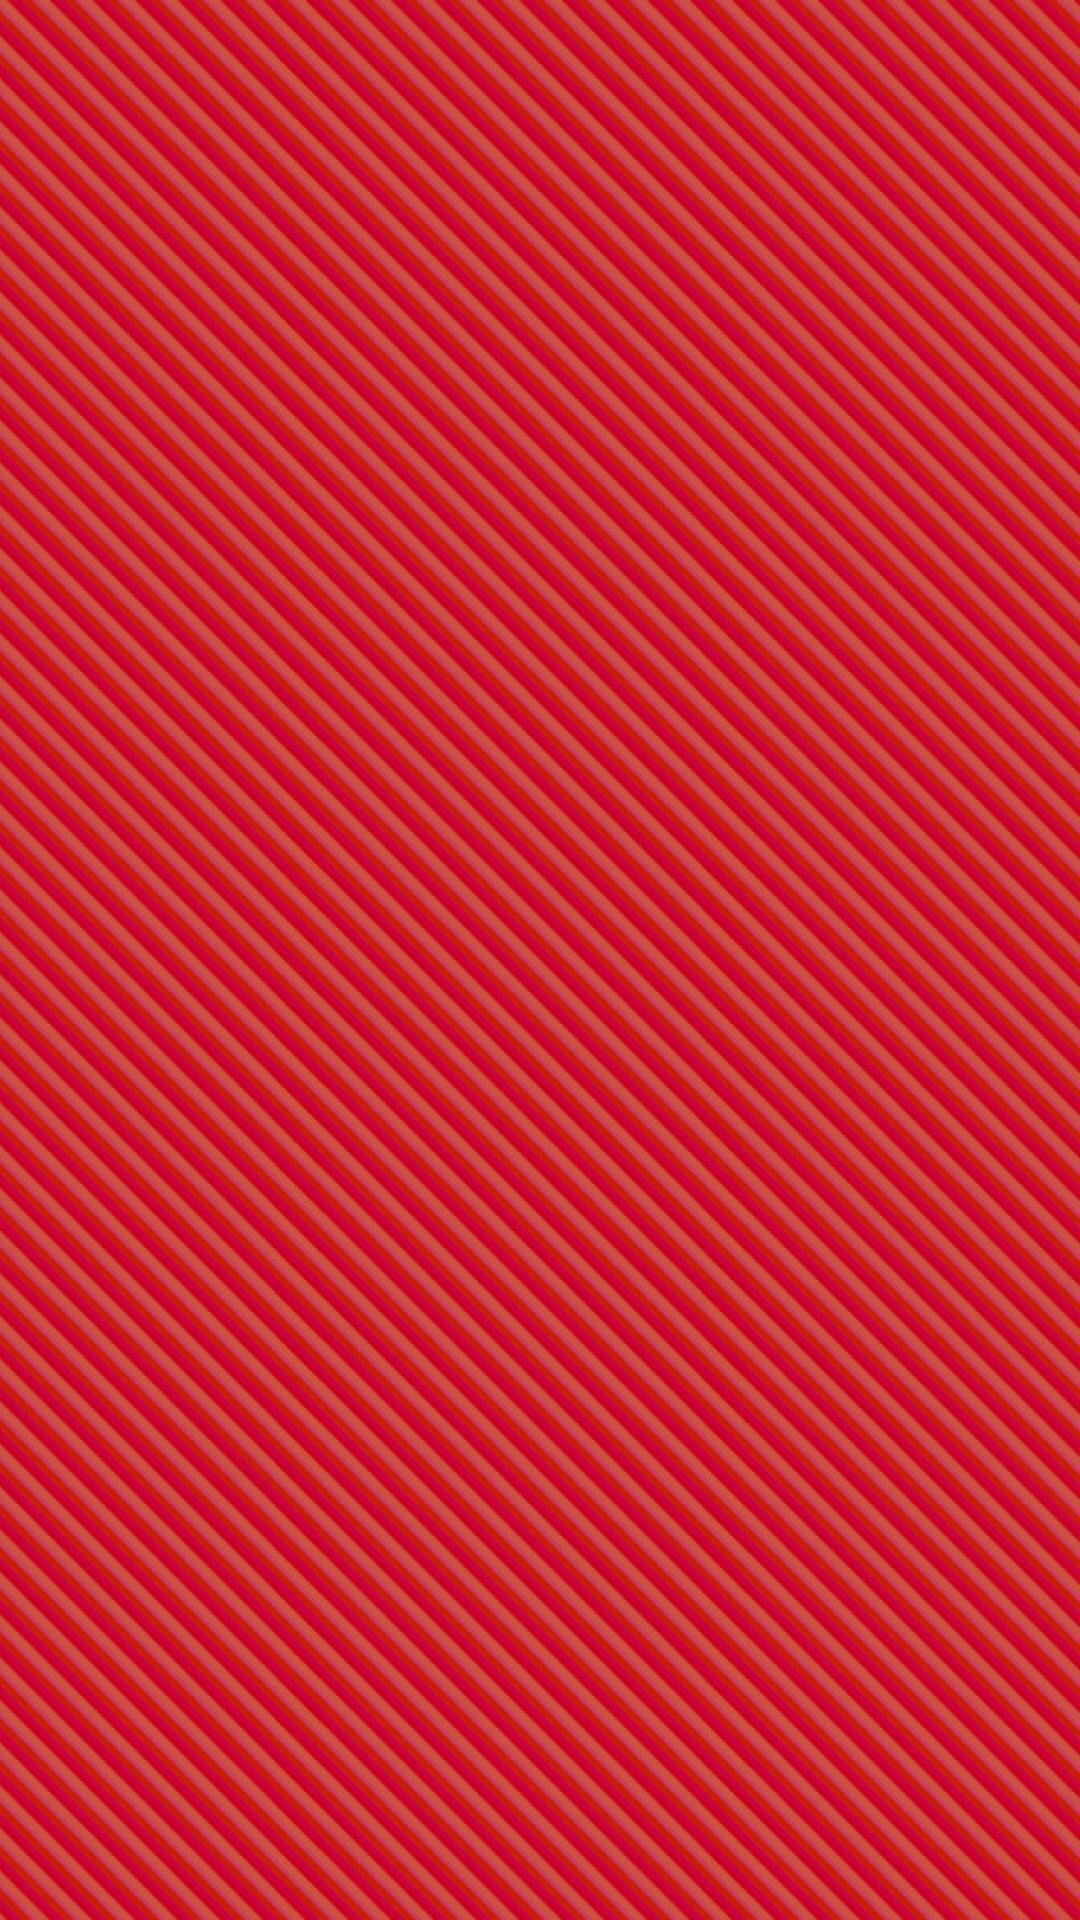 Red and White Striped Textile. Wallpaper in 1080x1920 Resolution